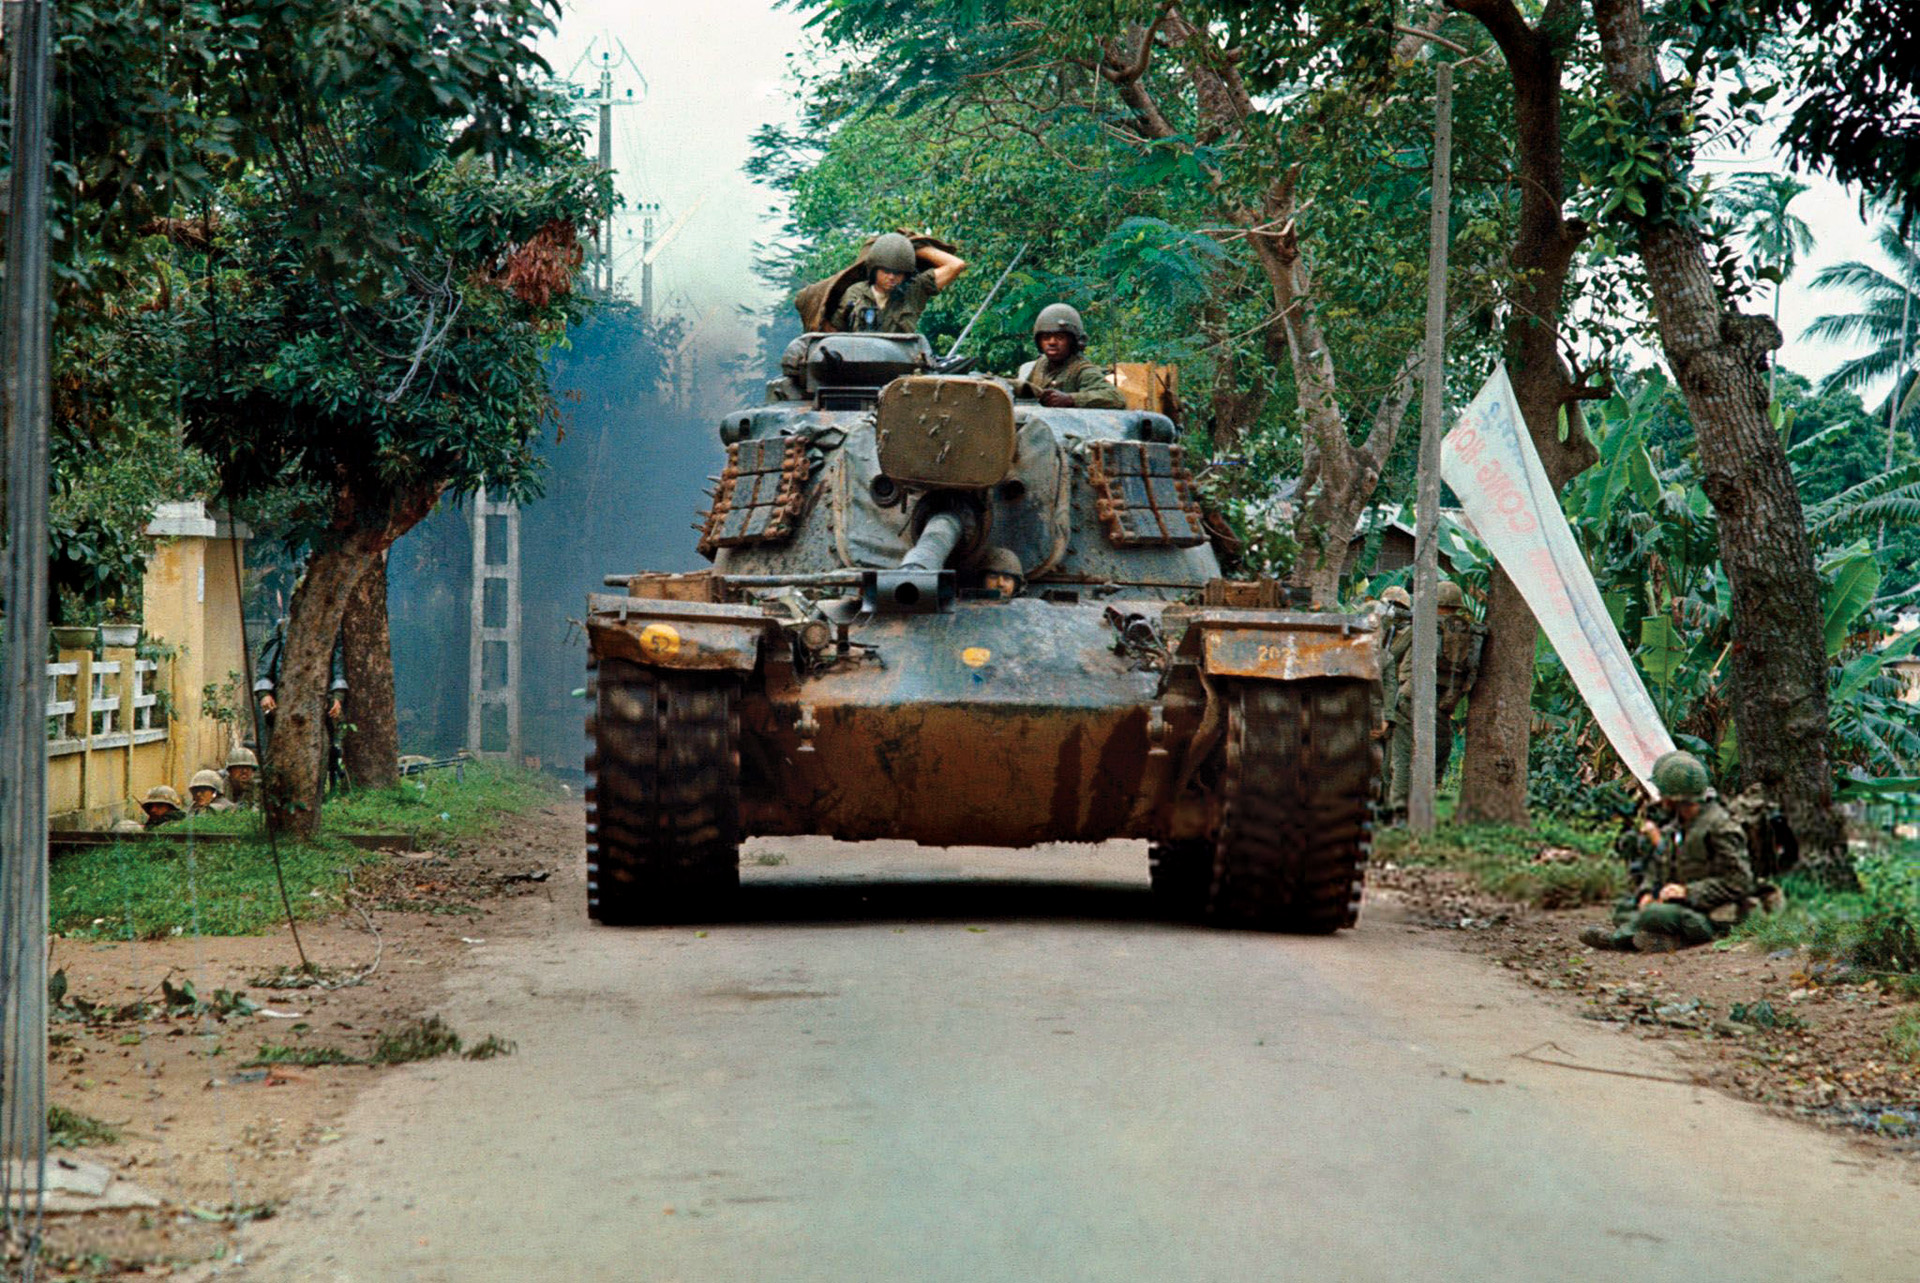 An M48A3 Patton tank with its 90mm gun moves down a street in Hanoi. Tank crews drew heavy fire and suffered substantial casualties as a result. 